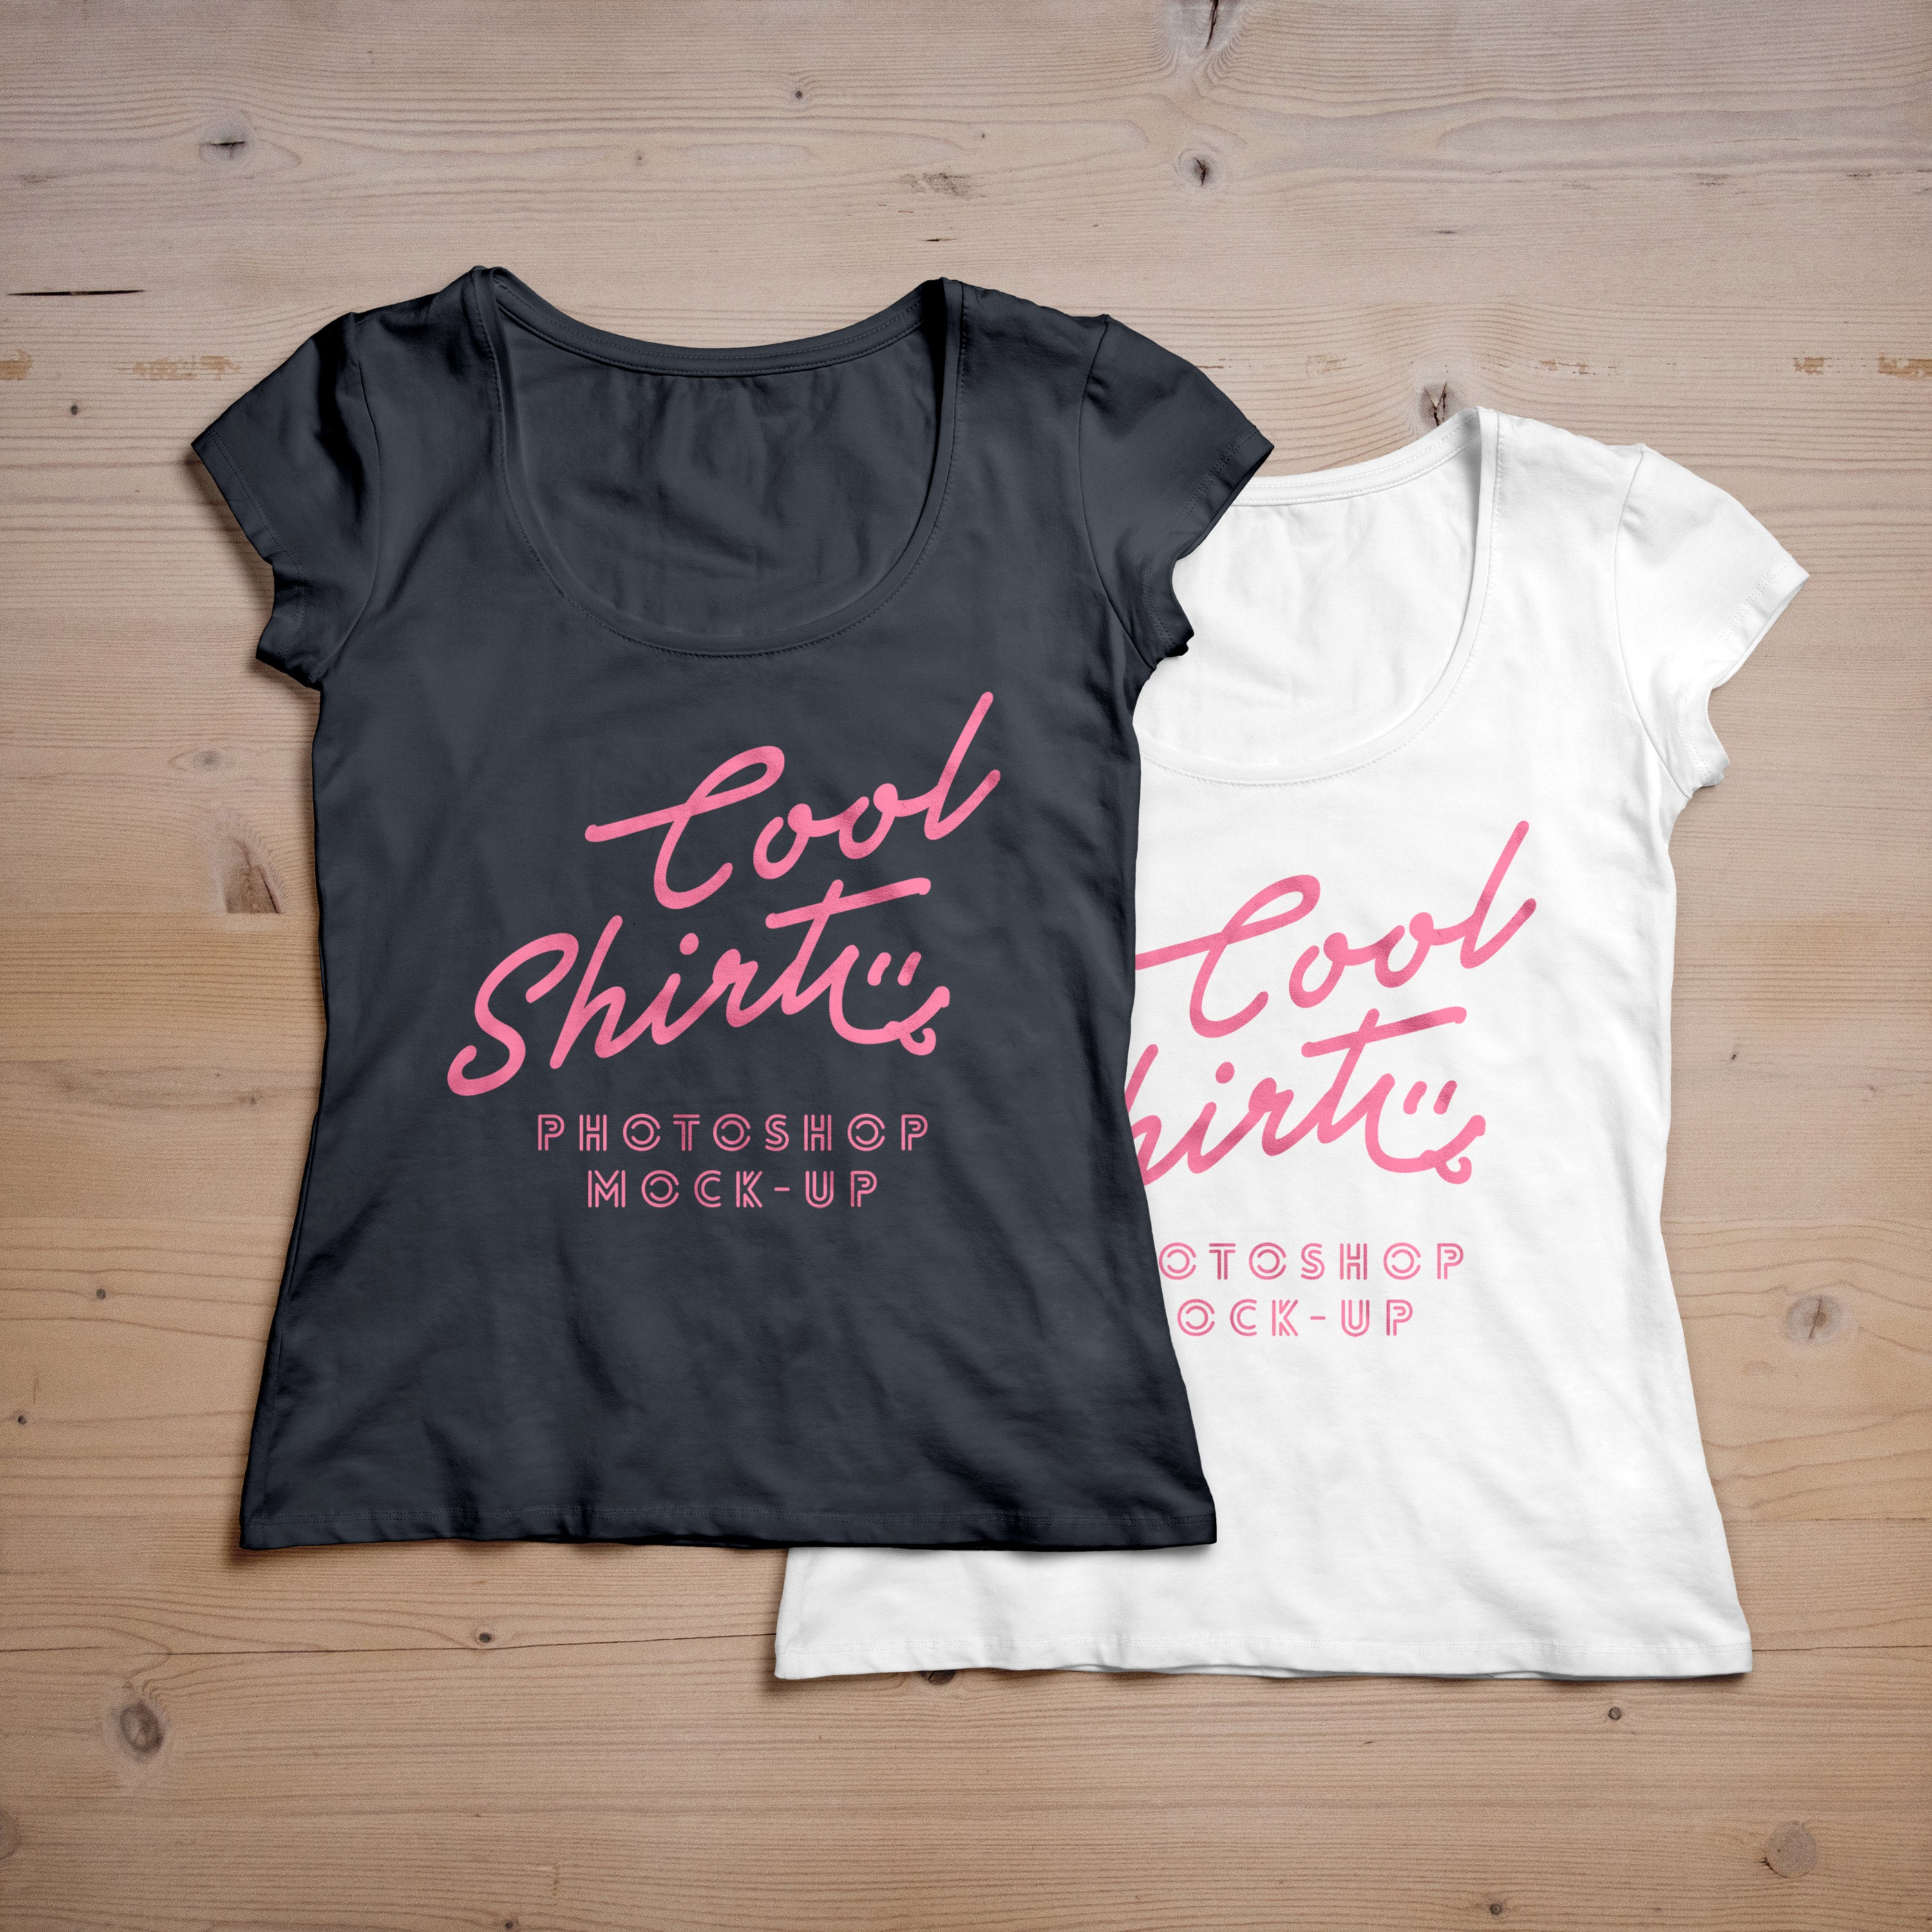 26 Free T Shirt Mockups Psd Templates For Your Online Store In 2020